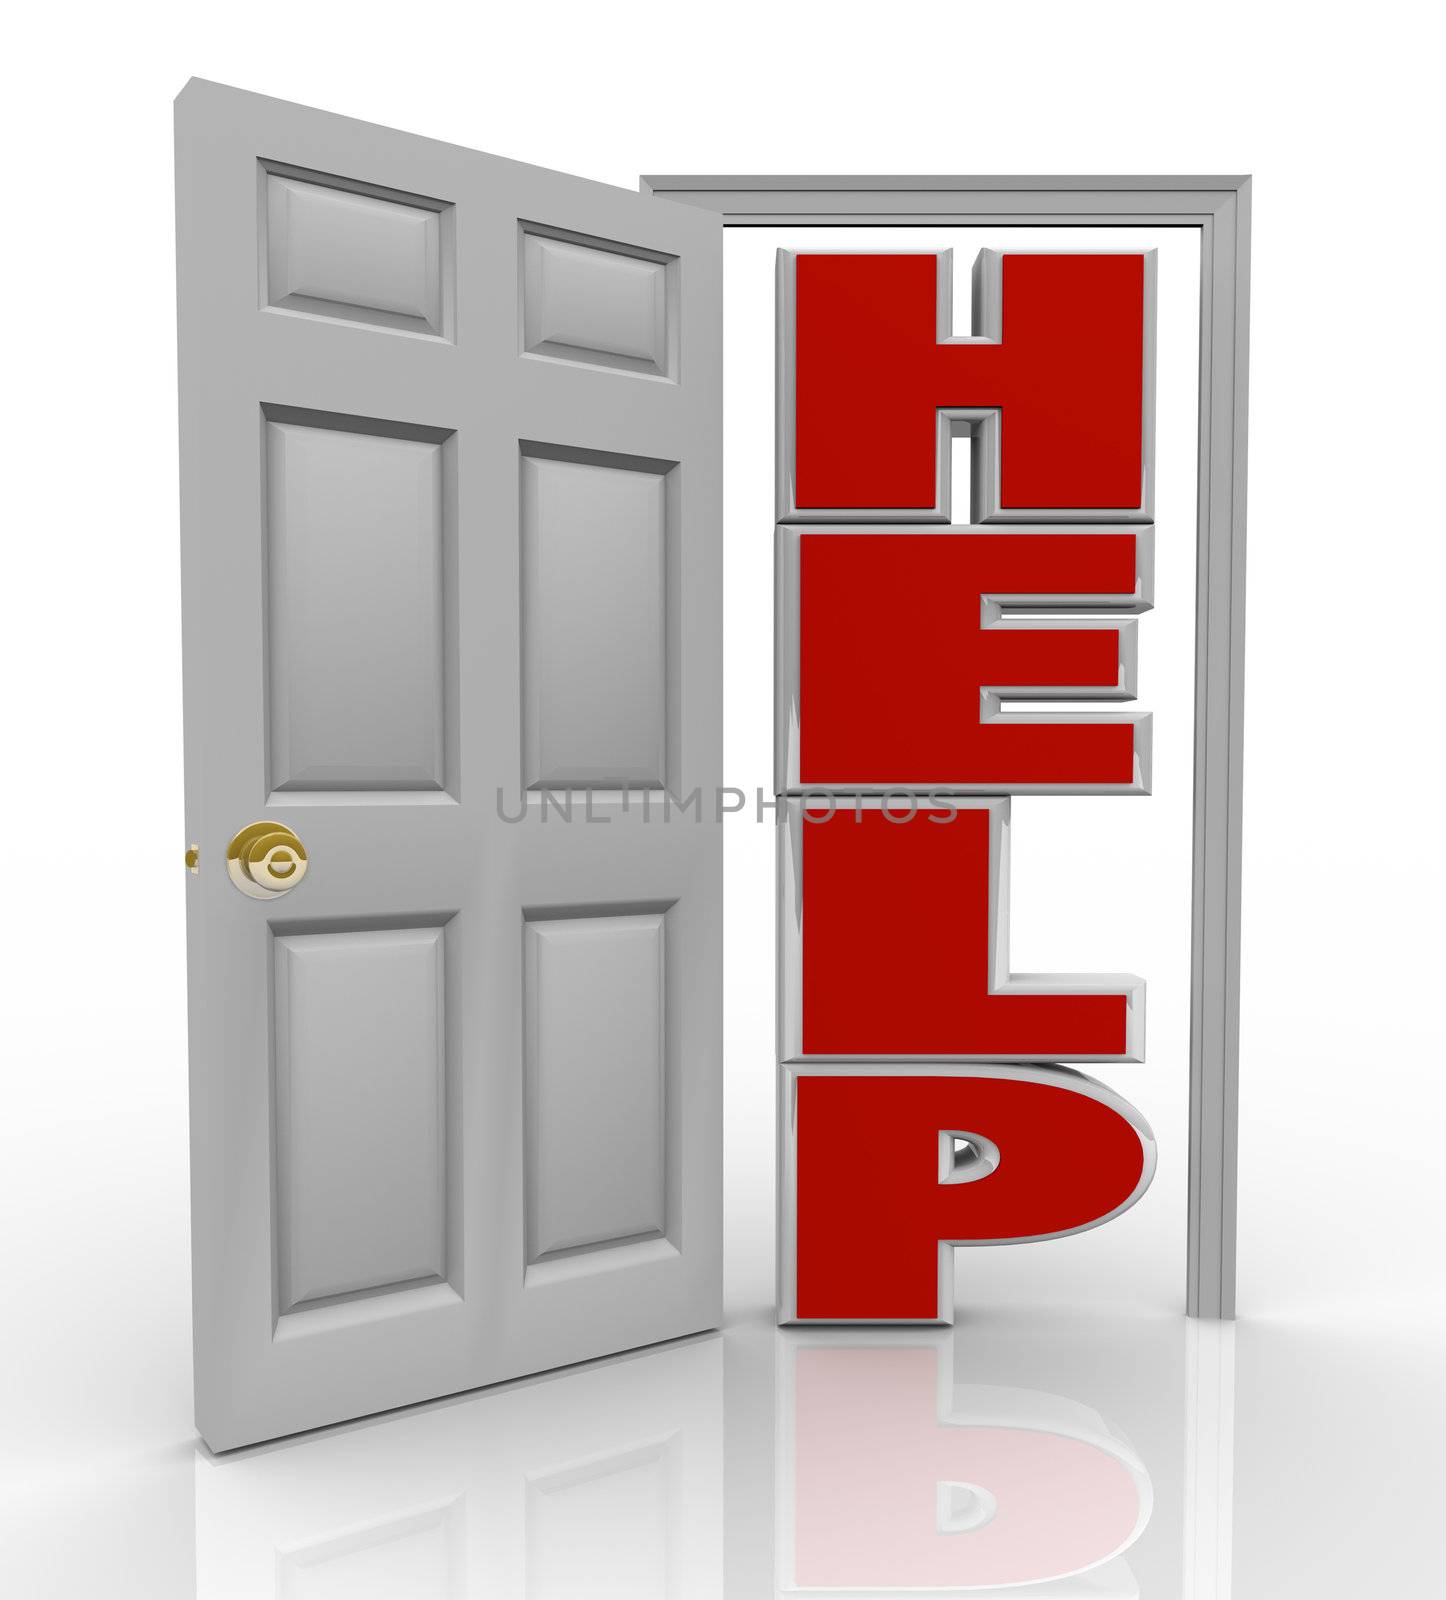 A white door opens to reveal the word Help symbolizing the support and assistance you can receive by opening up to a friend, colleague or counselor who can assist you in your needs